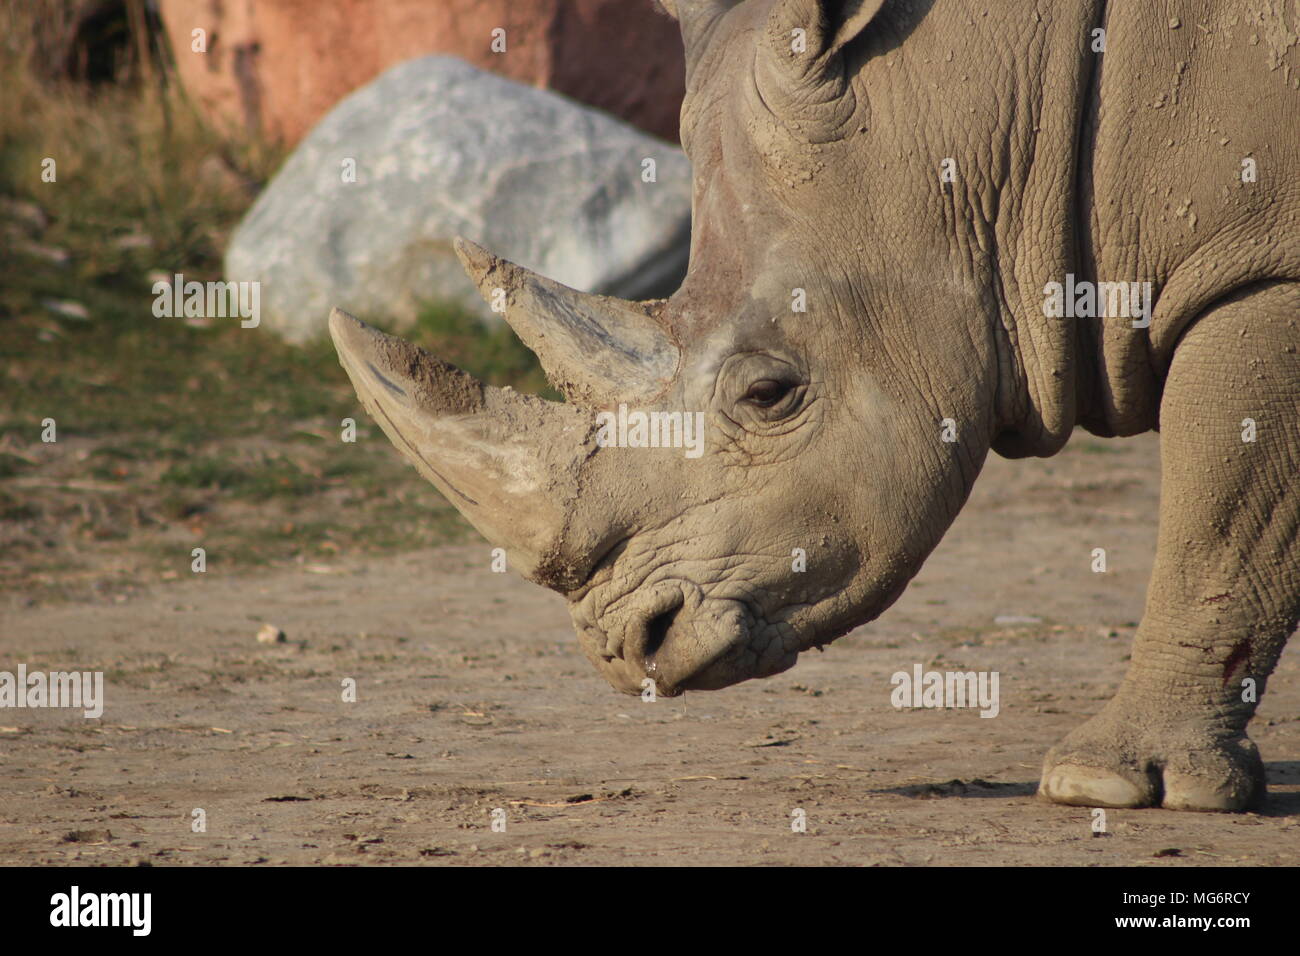 Close up portrait of a white rhino which is an endangered animal the requires conservation Stock Photo